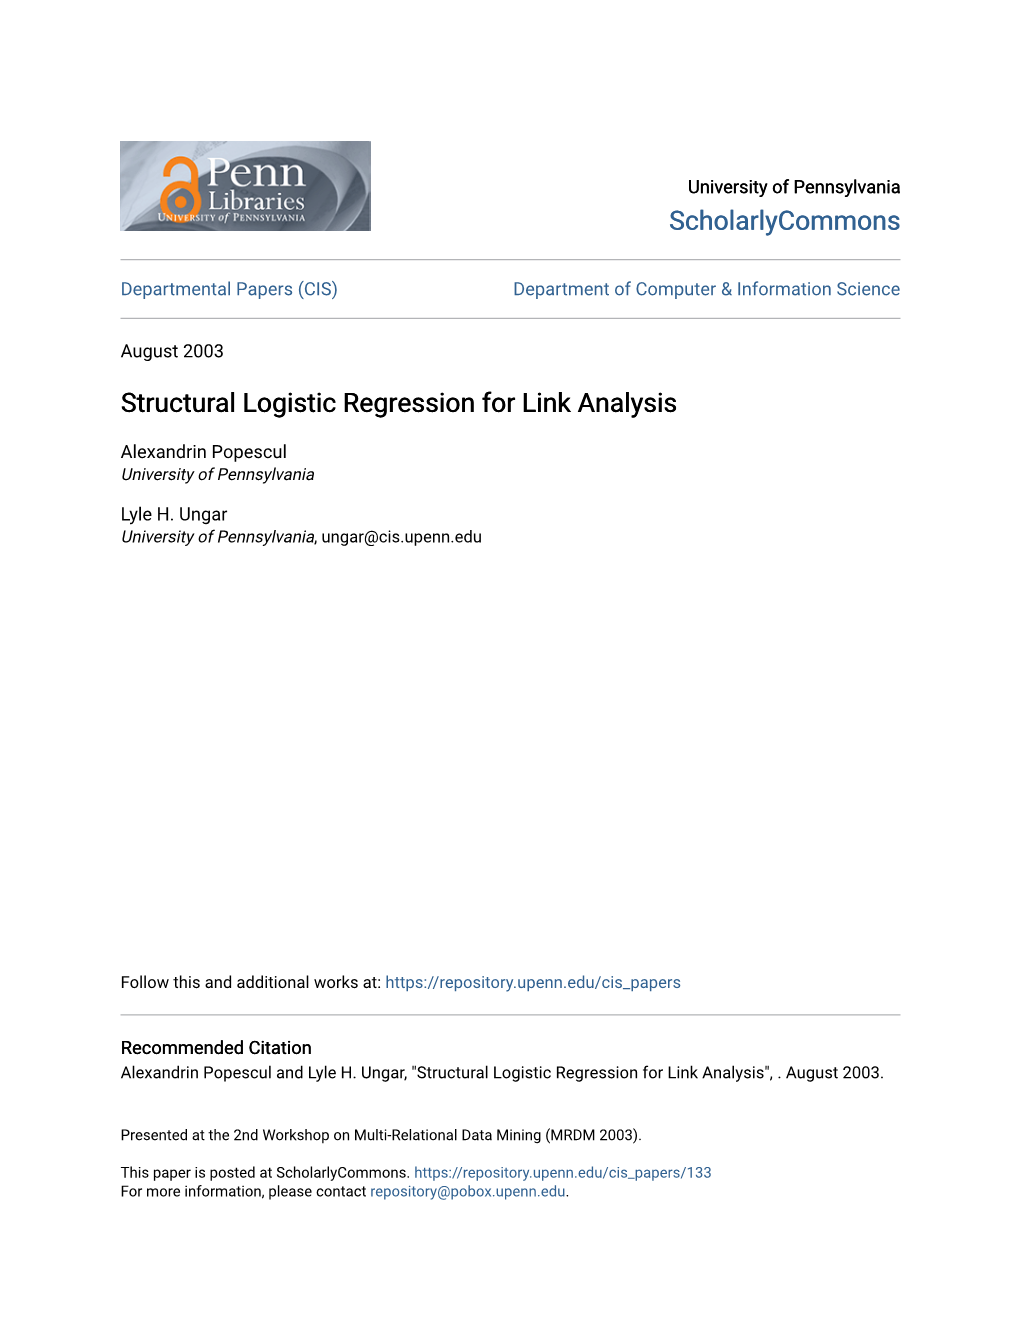 Structural Logistic Regression for Link Analysis